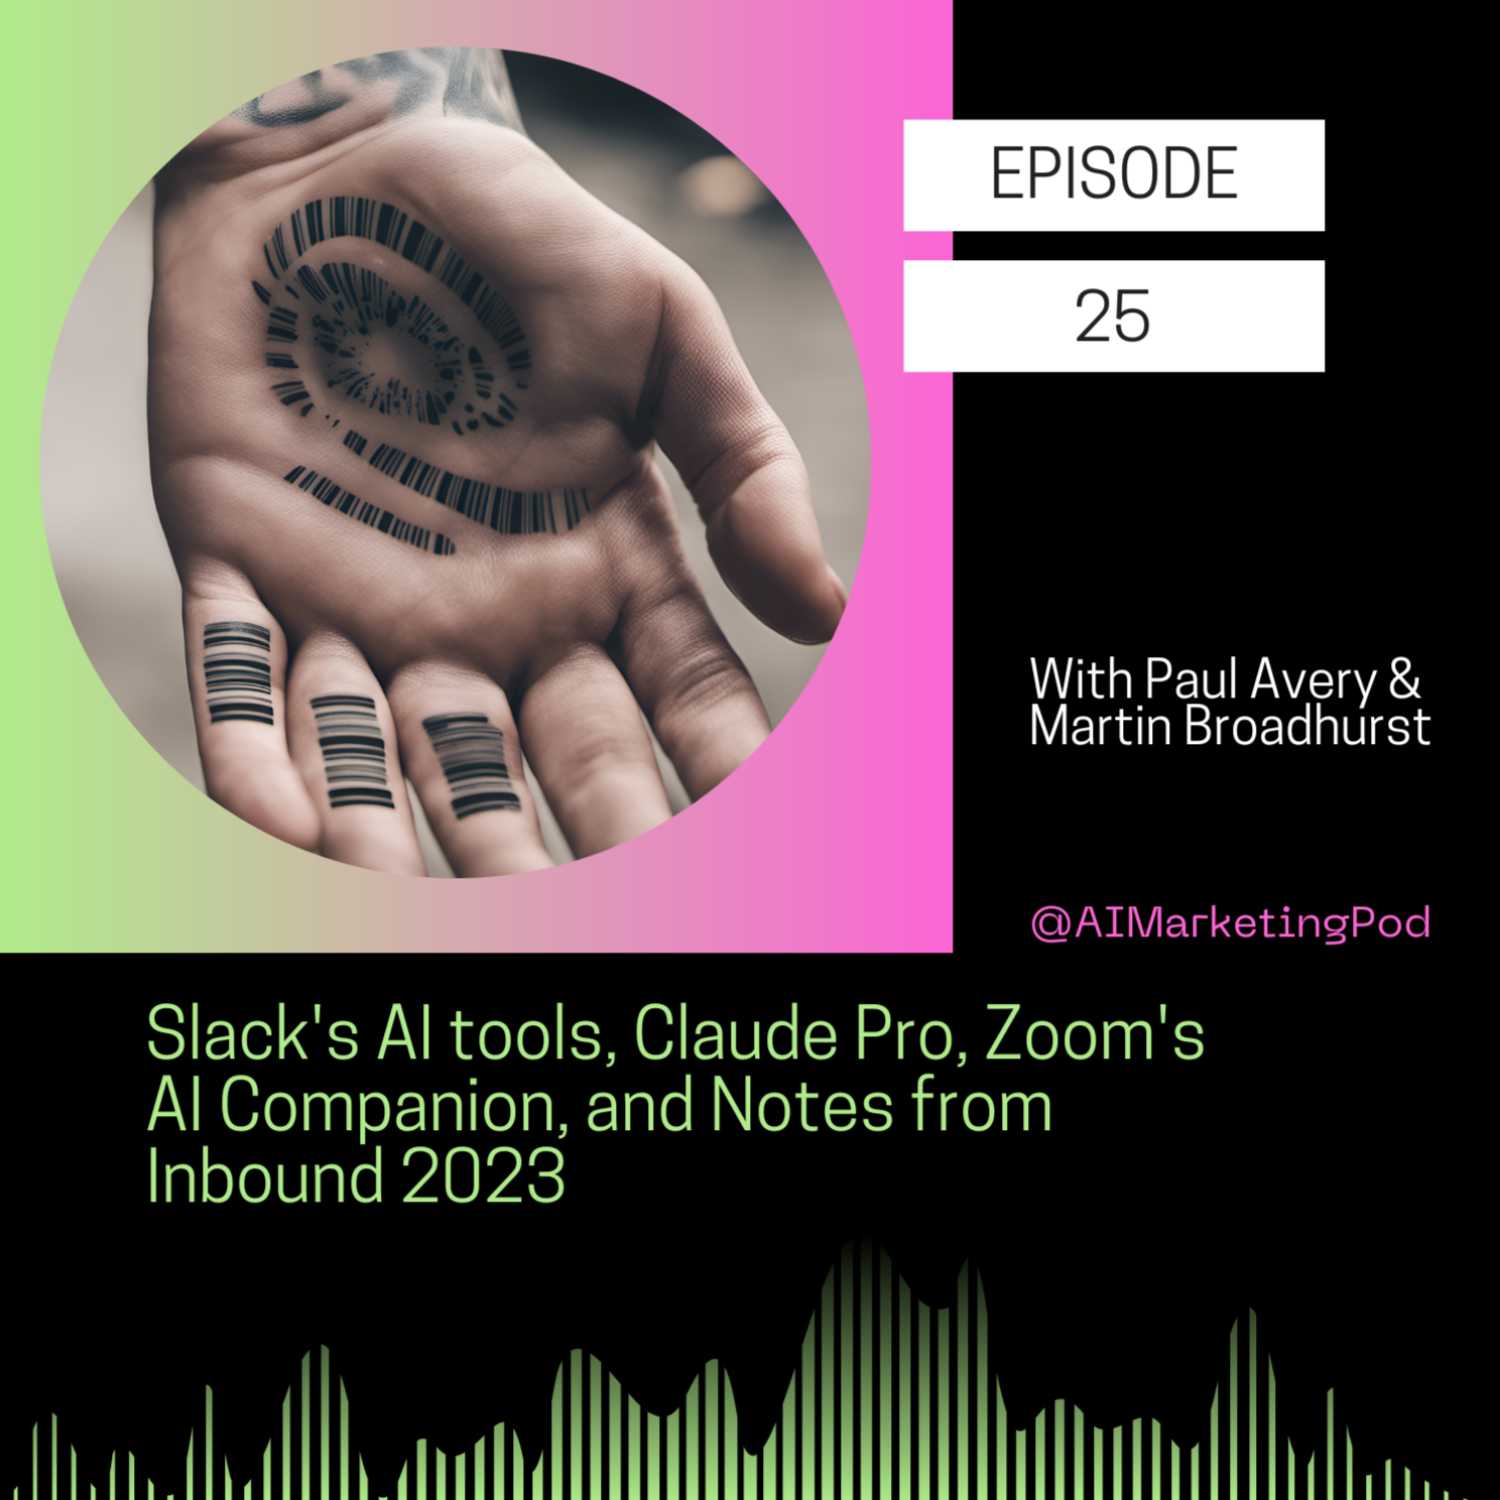 Slack's AI tools, Claude Pro, Zoom's AI Companion, and Notes from Inbound 2023